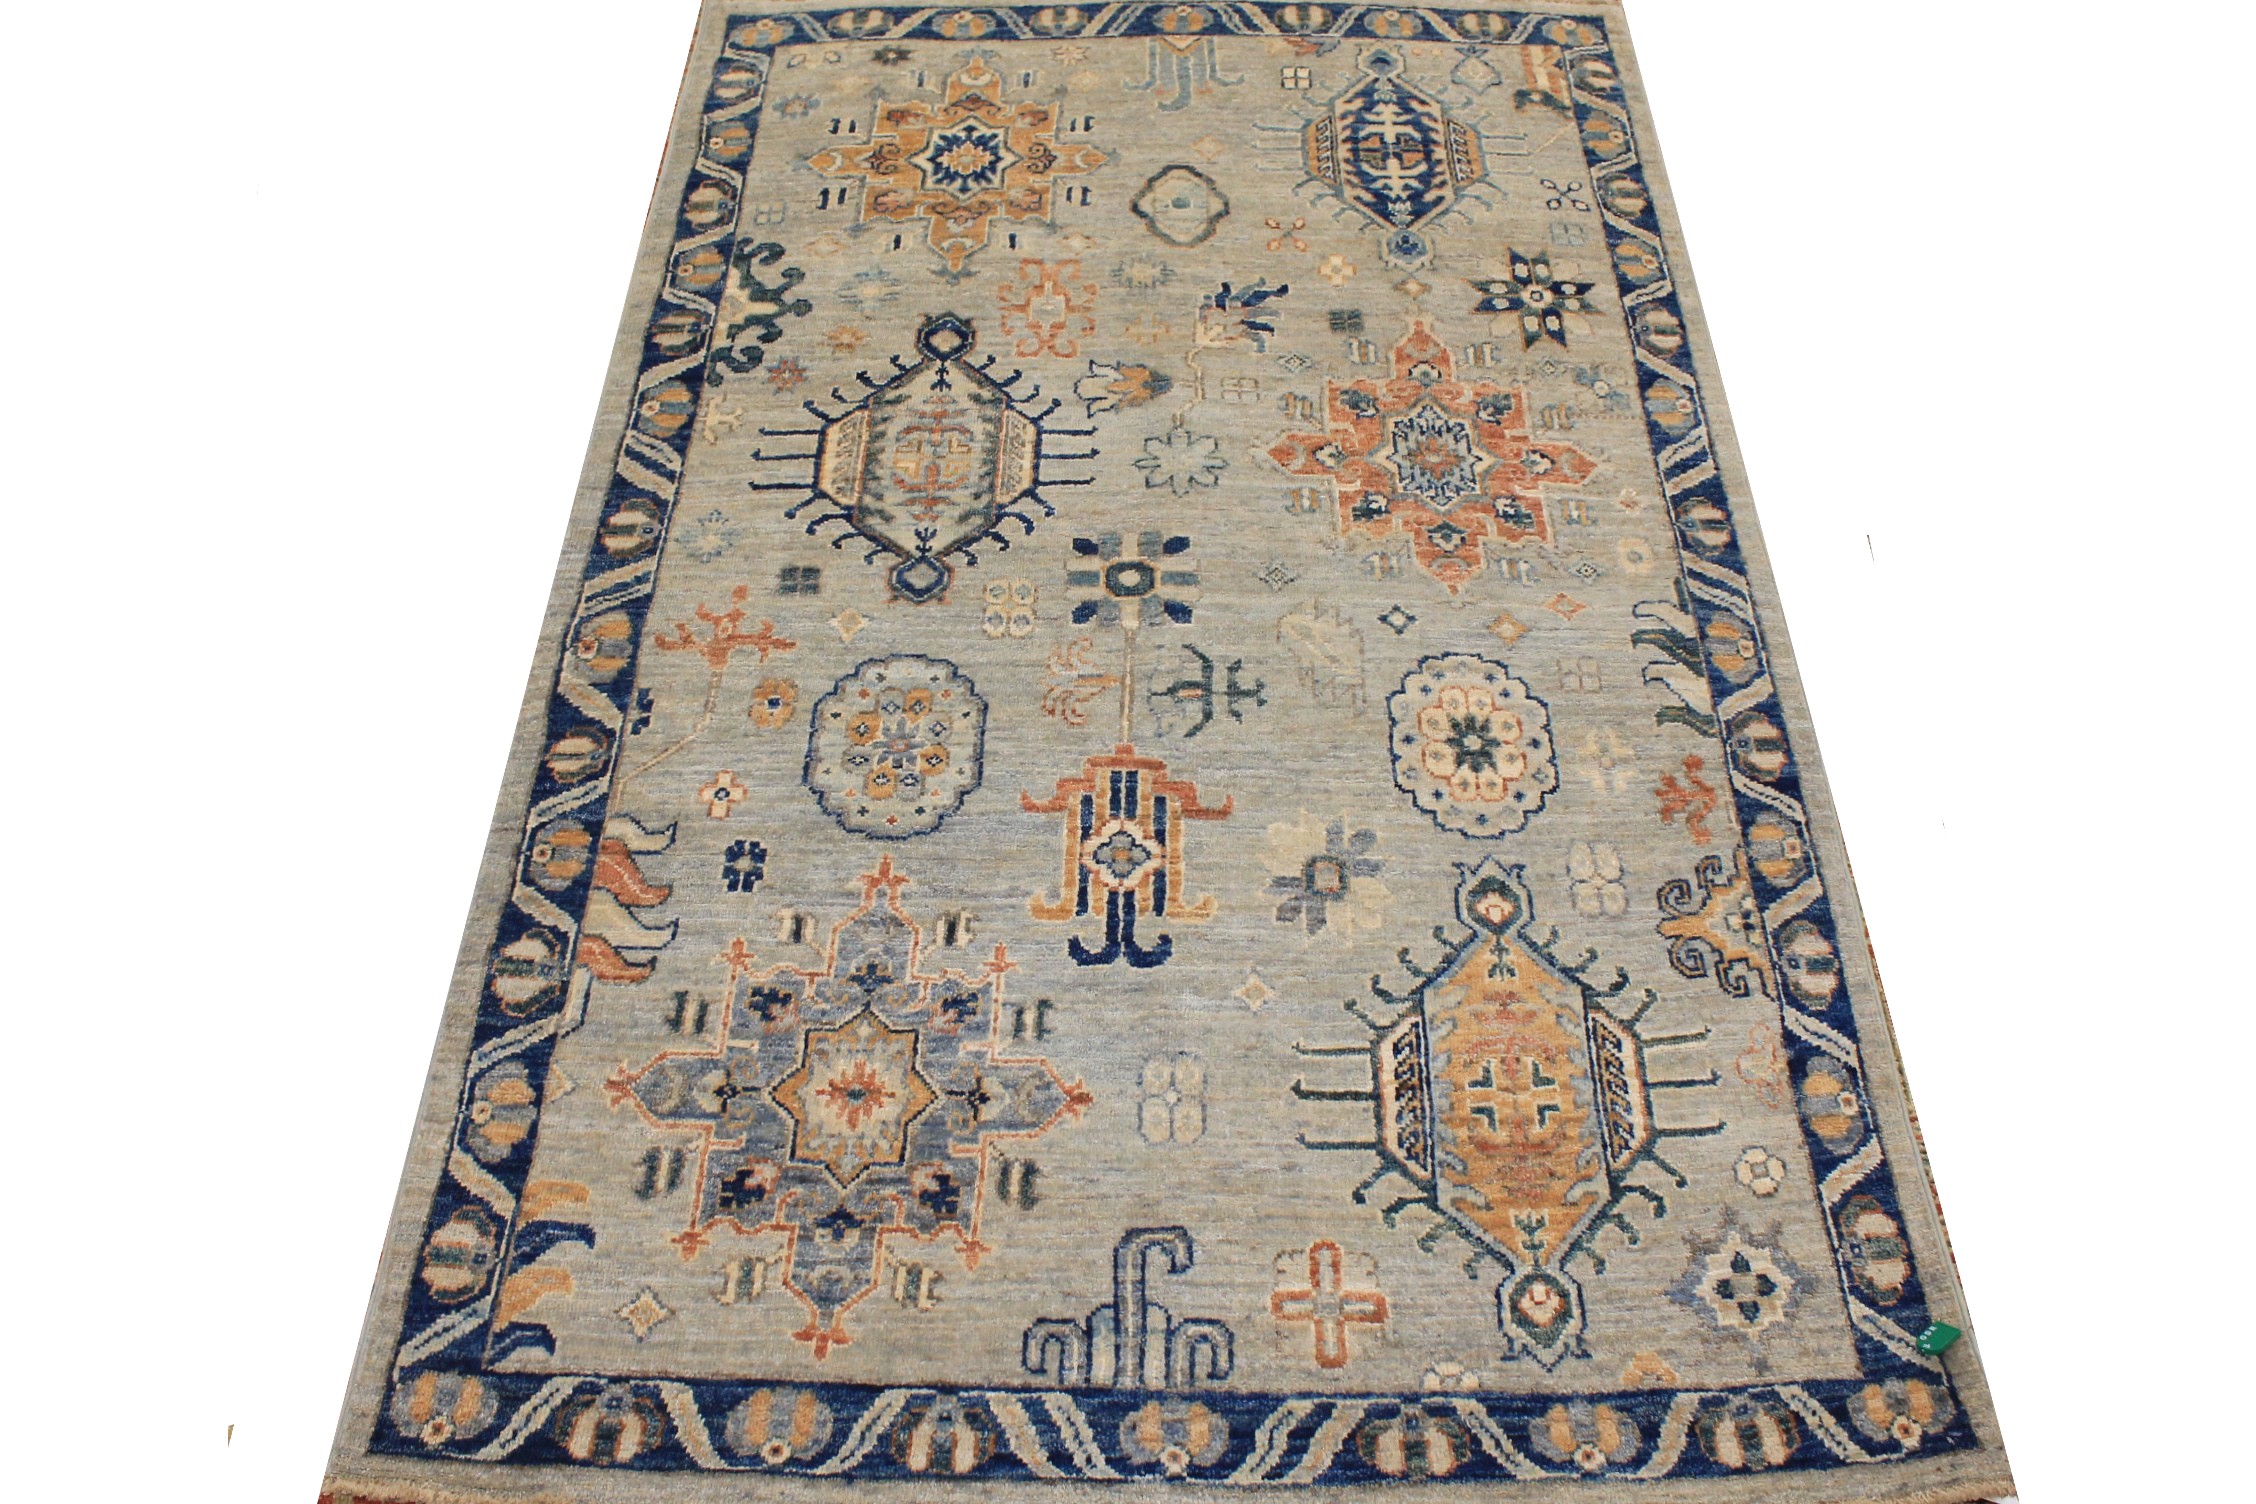 4x6 Aryana & Antique Revivals Hand Knotted  Area Rug - MR026628